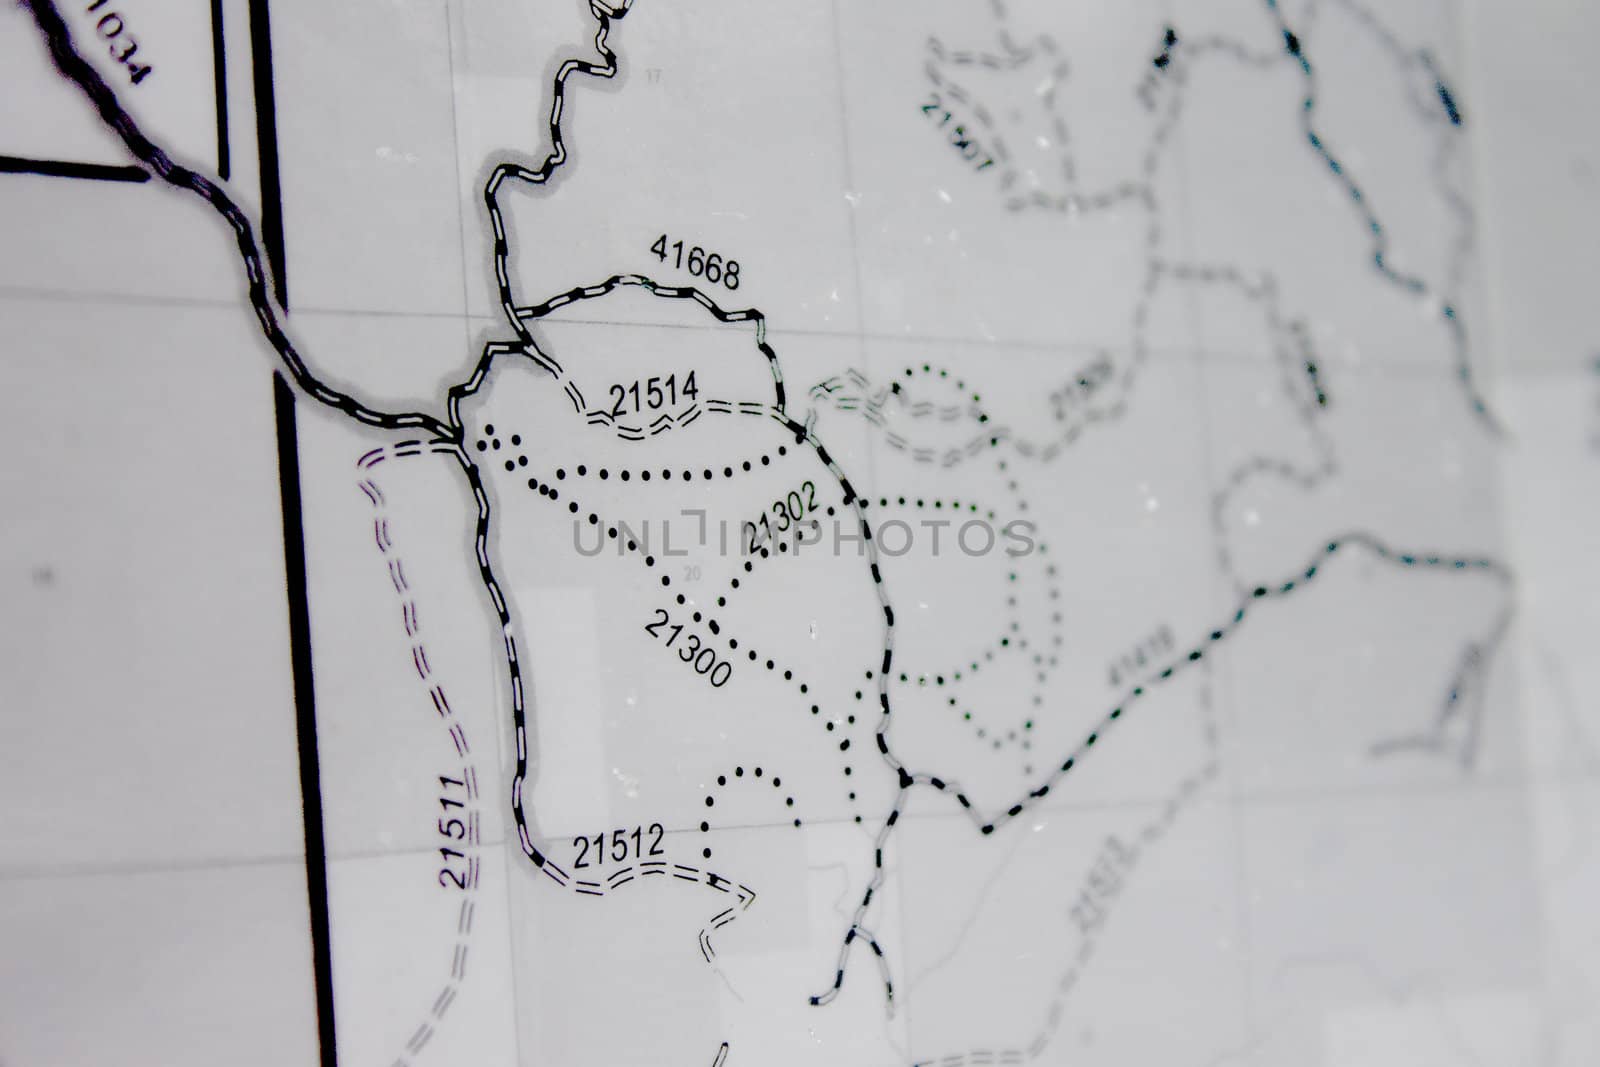 Black and white forest maps of the sierra nevadas